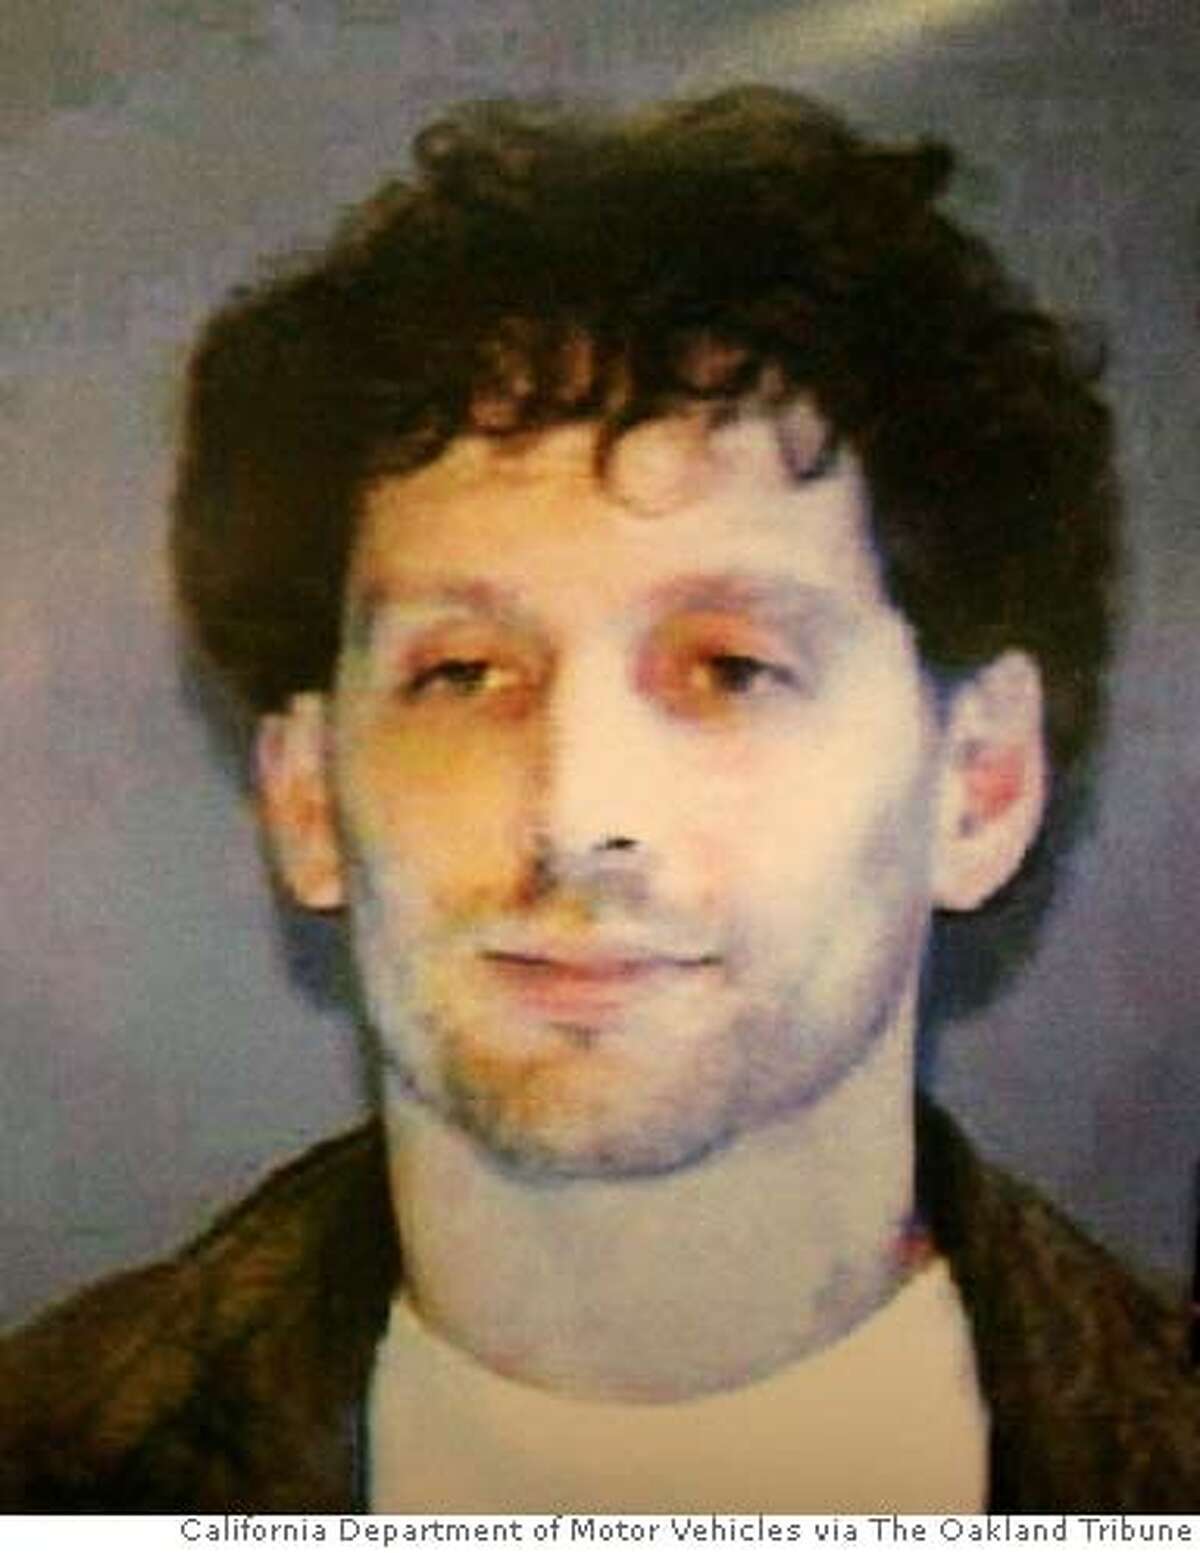 In this 1998 photo released by the California Department of Motor Vehicles, Hans Thomas Reiser is shown. Hans Thomas Reiser was arrested Tuesday, Oct. 10, 2006, on suspicion of killing his missing wife more than a month ago, police said. Reiser was arrested one day after Oakland police, with the help of the FBI, searched his house a second time for clues in the disappearance of Nina Reiser, 31, who was last seen Sept. 3 while dropping off her 7-year-old son and 5-year-old daughter at her husband's home in the Oakland hills. (AP Photo/California Department of Motor Vehicles via The Oakland Tribune) LOCALS PLEASE CREDIT, MAGS OUT, BEST QUALITY AVAILABLE